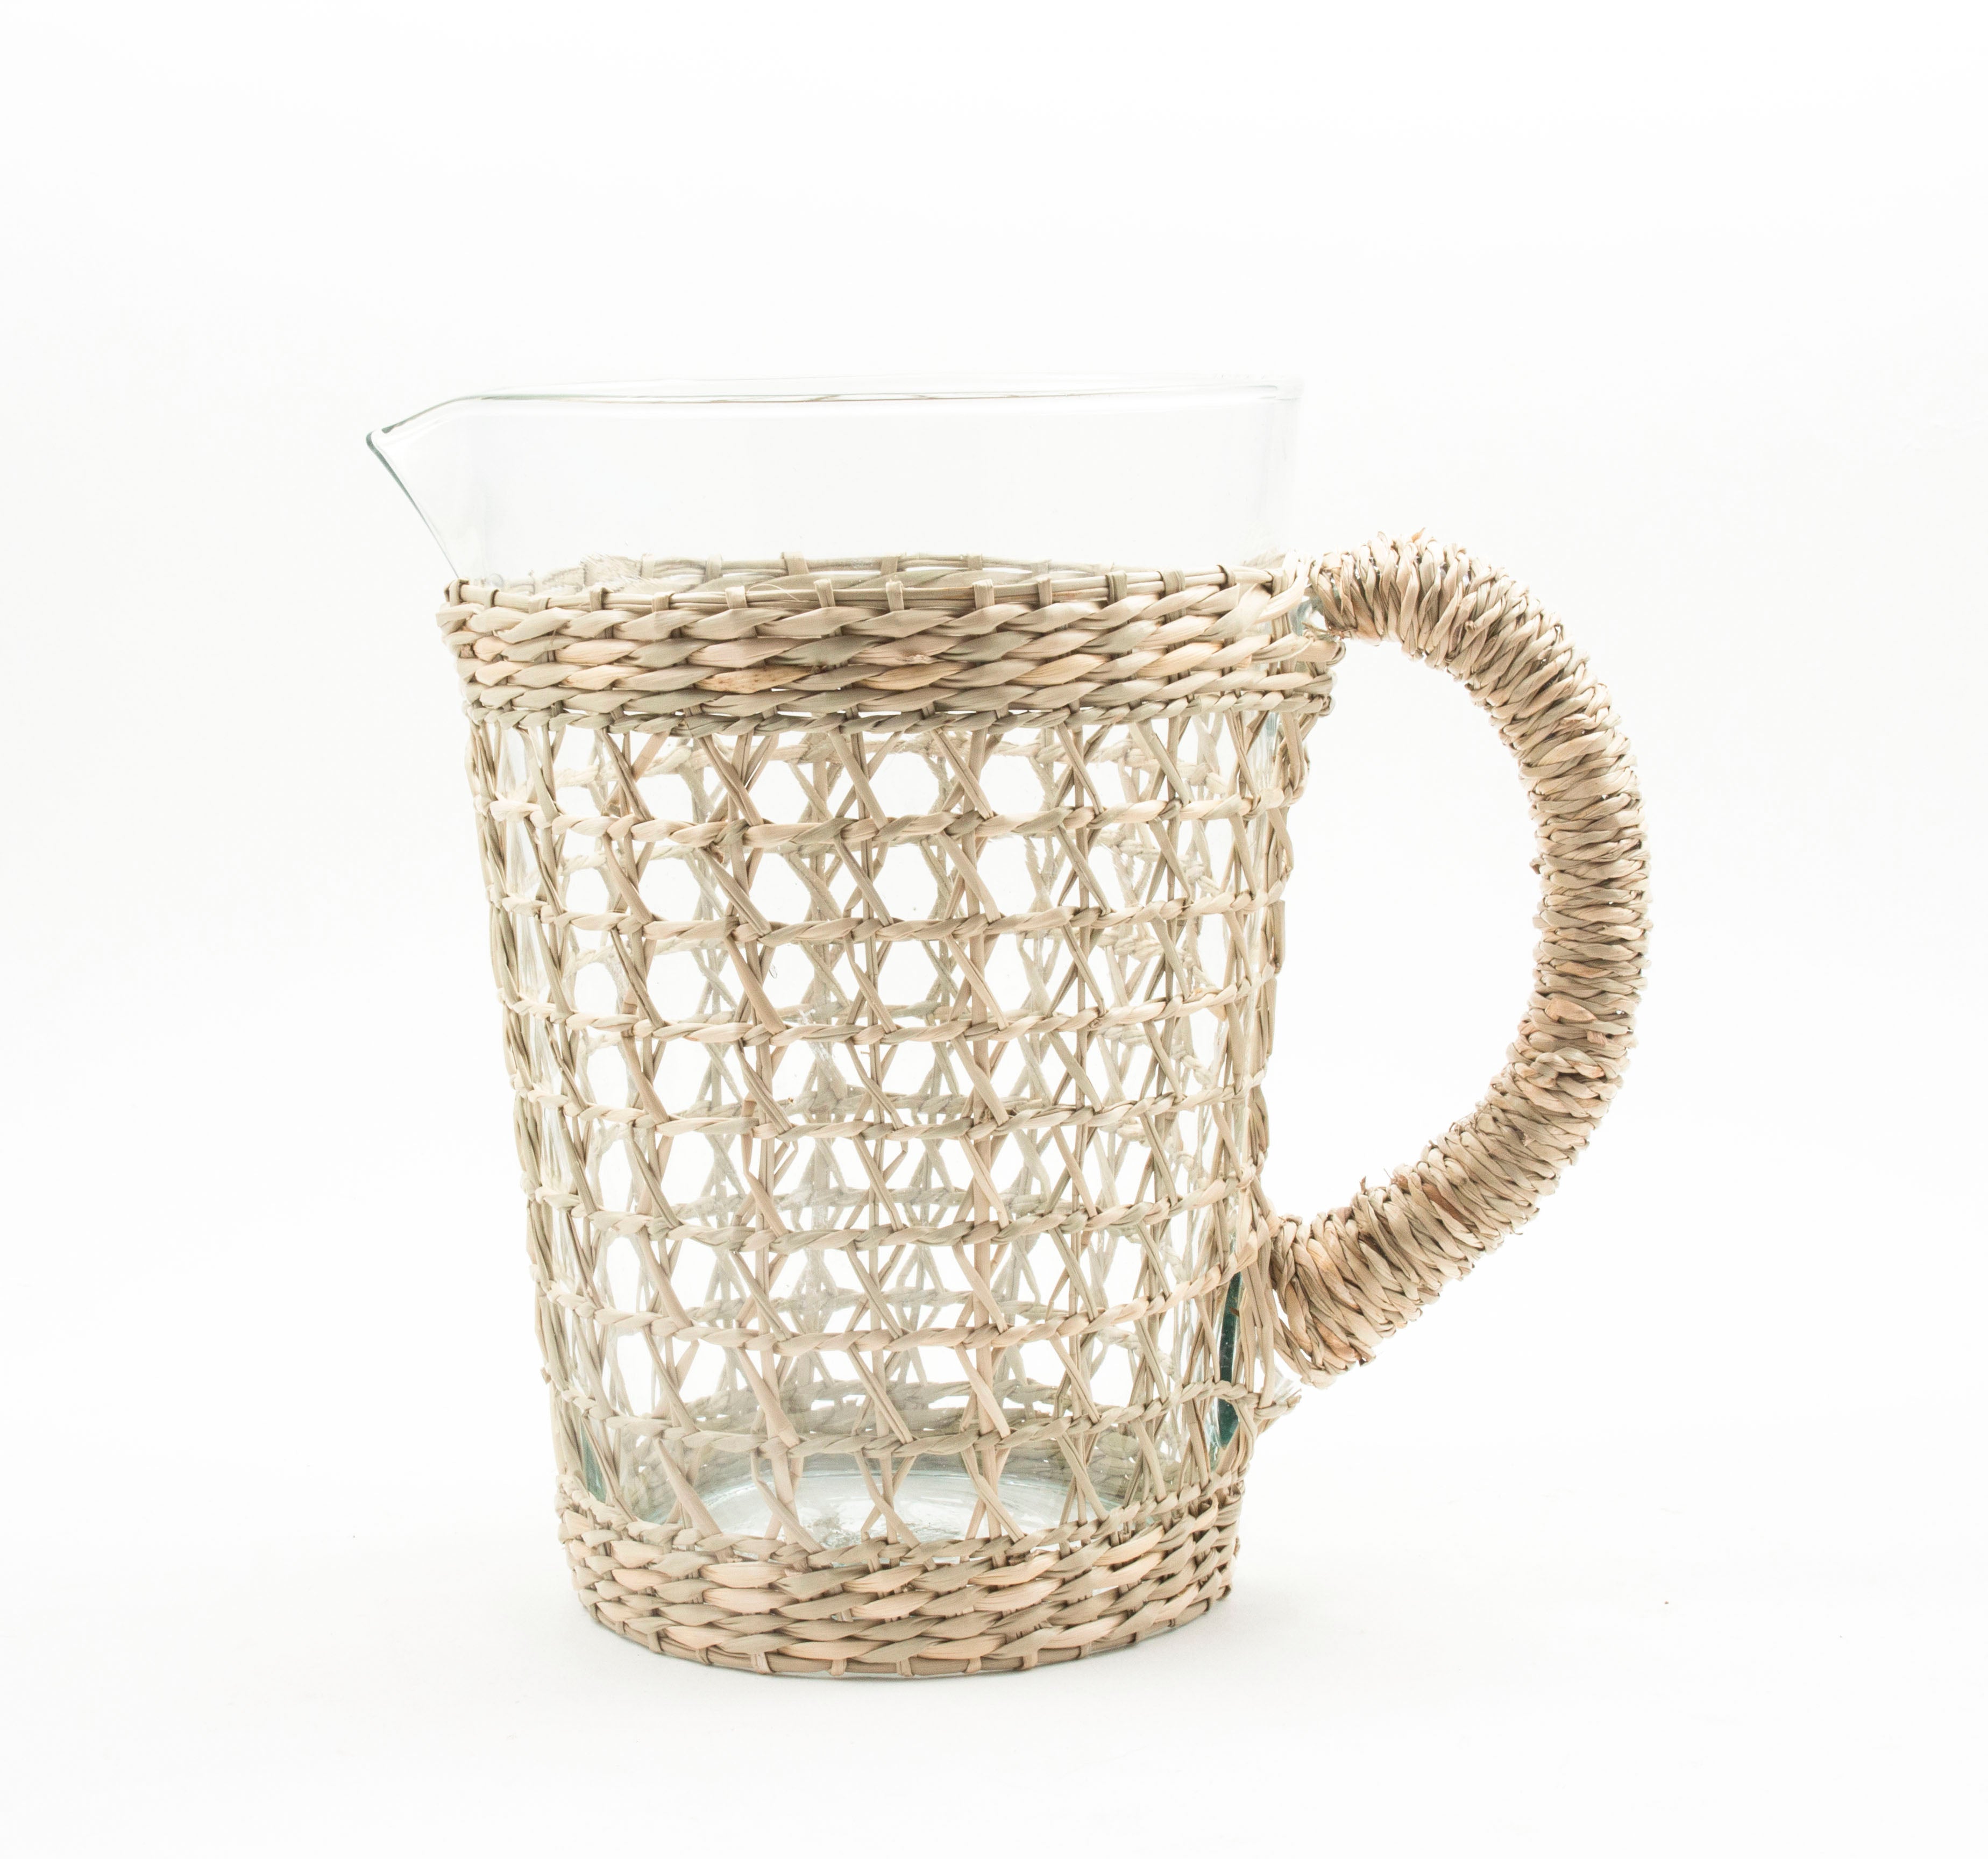 Seagrass Cage Pitcher Glass Seagrass Brand_Seagrass & Rattan Kitchen_Drinkware Serving Pieces MG_2147_OFFER